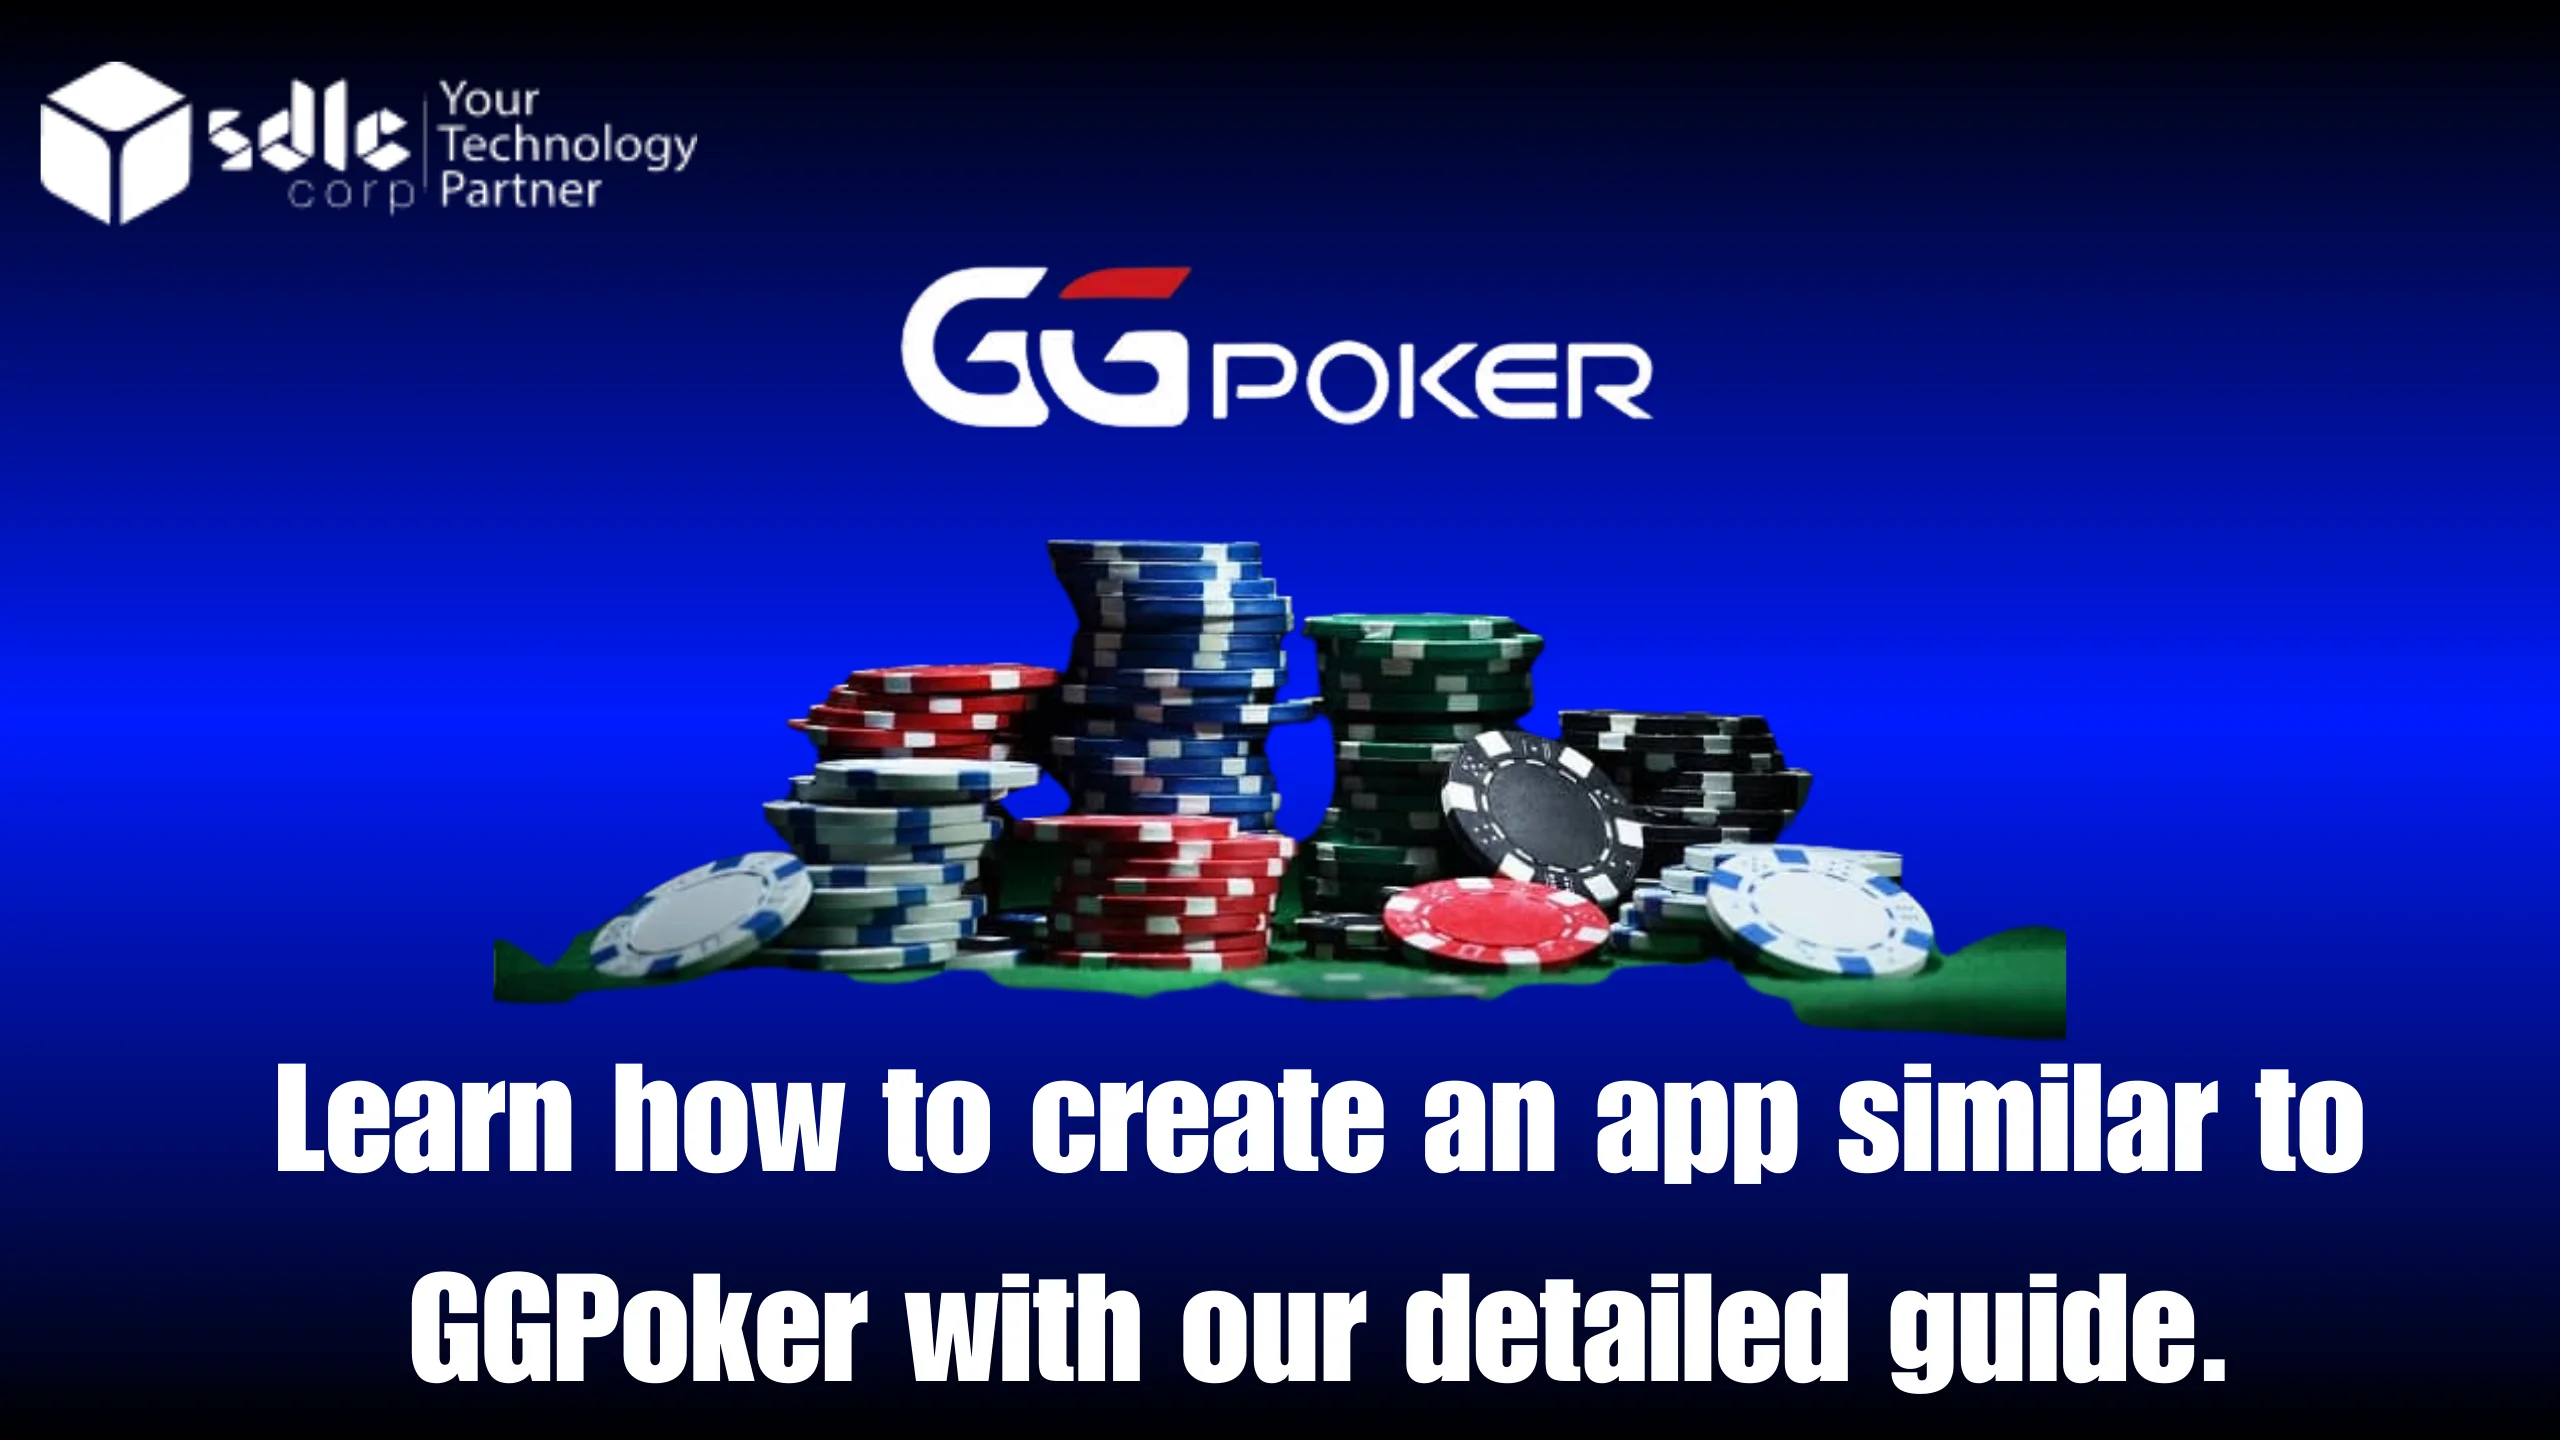 Learn how to create an app similar to GGPoker with our detailed guide.